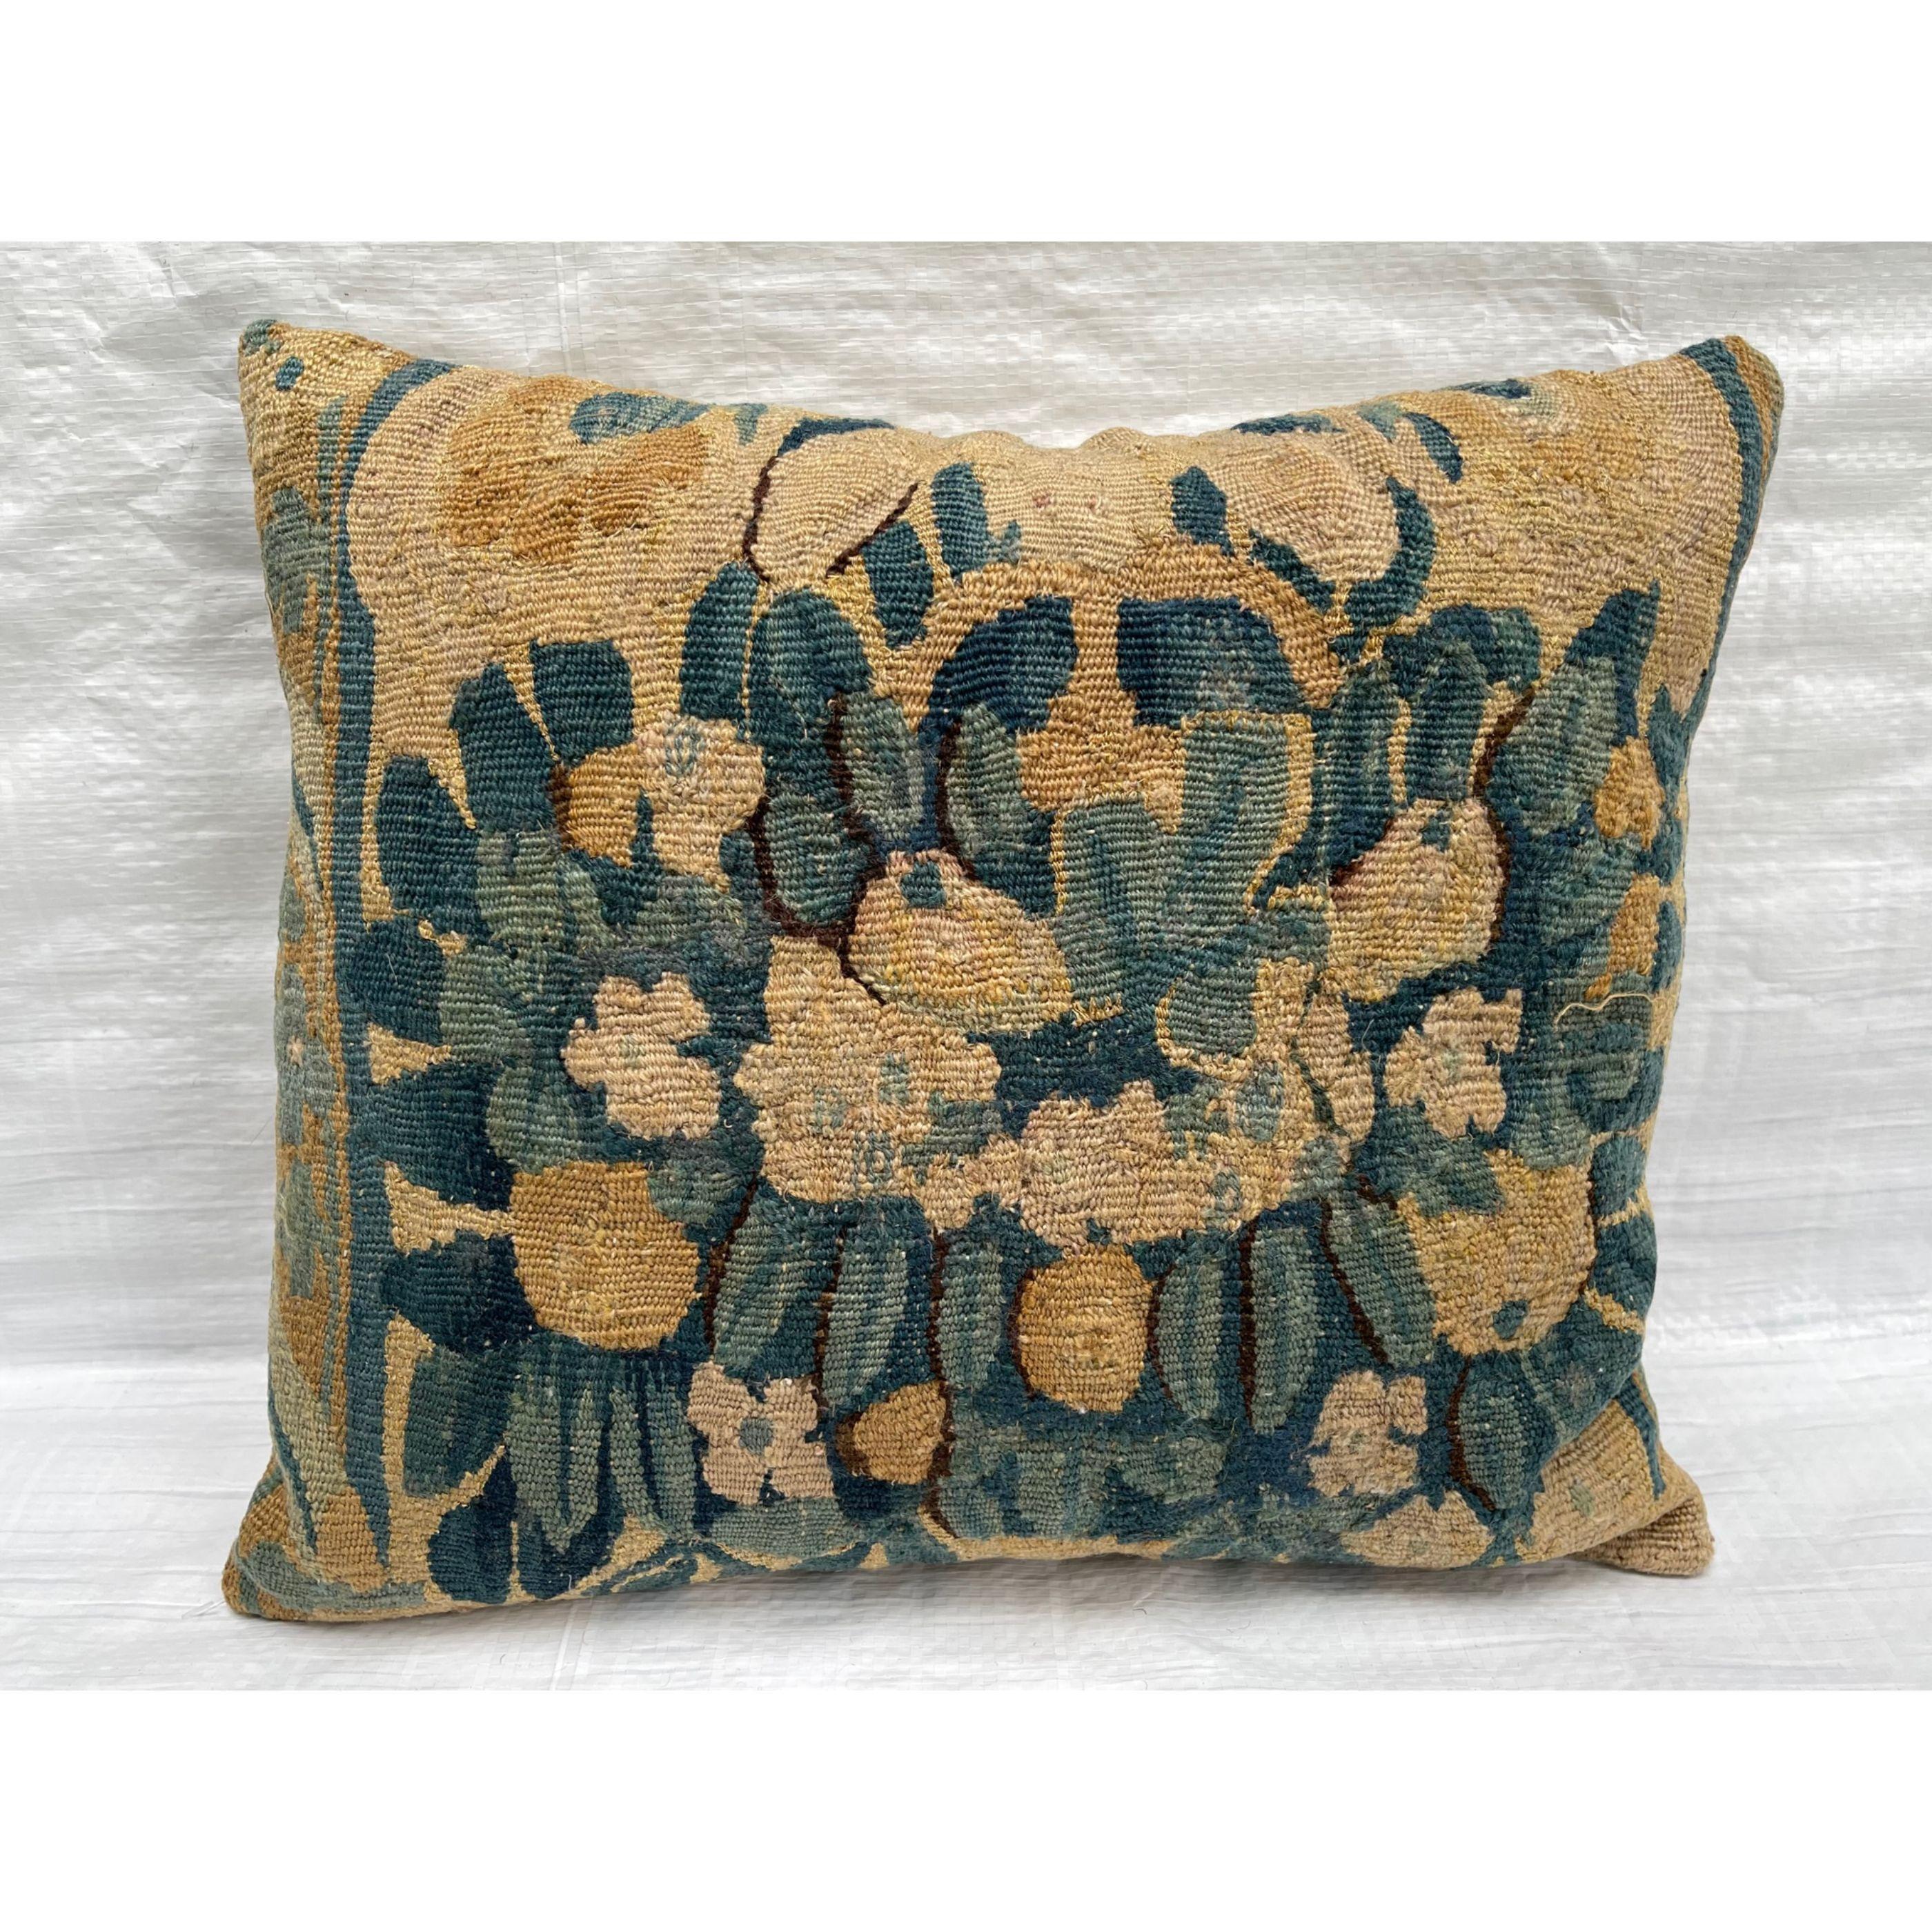 Empire Mid-17th Century Flemish Tapestry Pillow For Sale